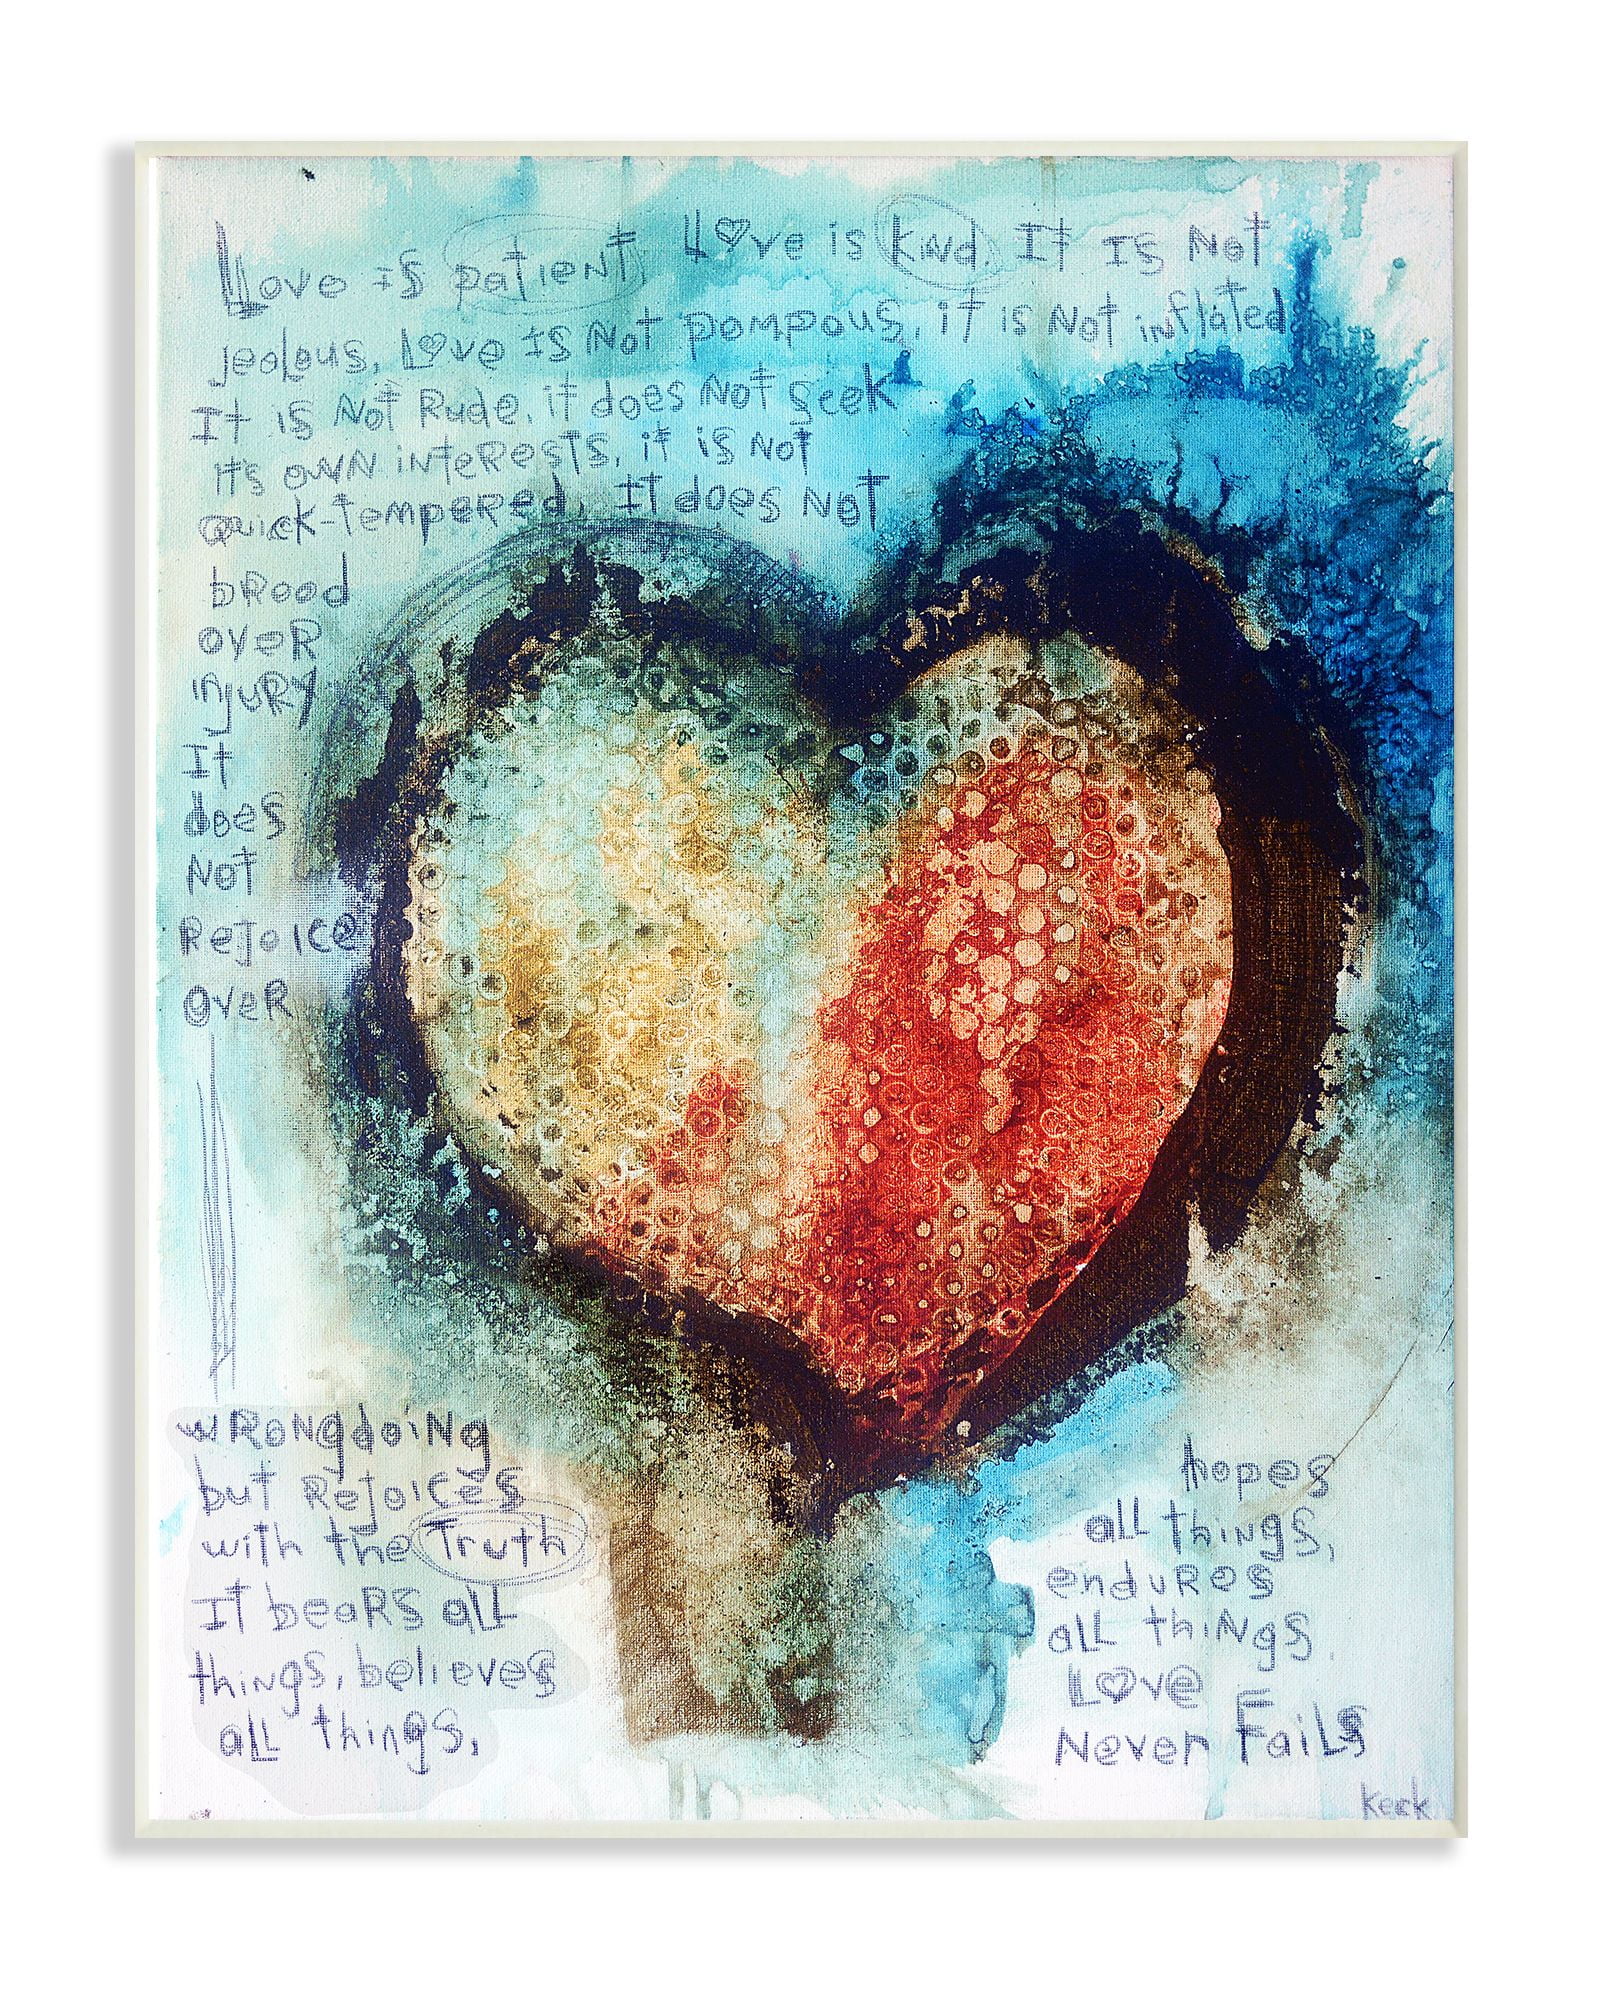 Texturized The Over Red and Art Blue Heart Collage Decor Home Words Art Painted Stupell Framed